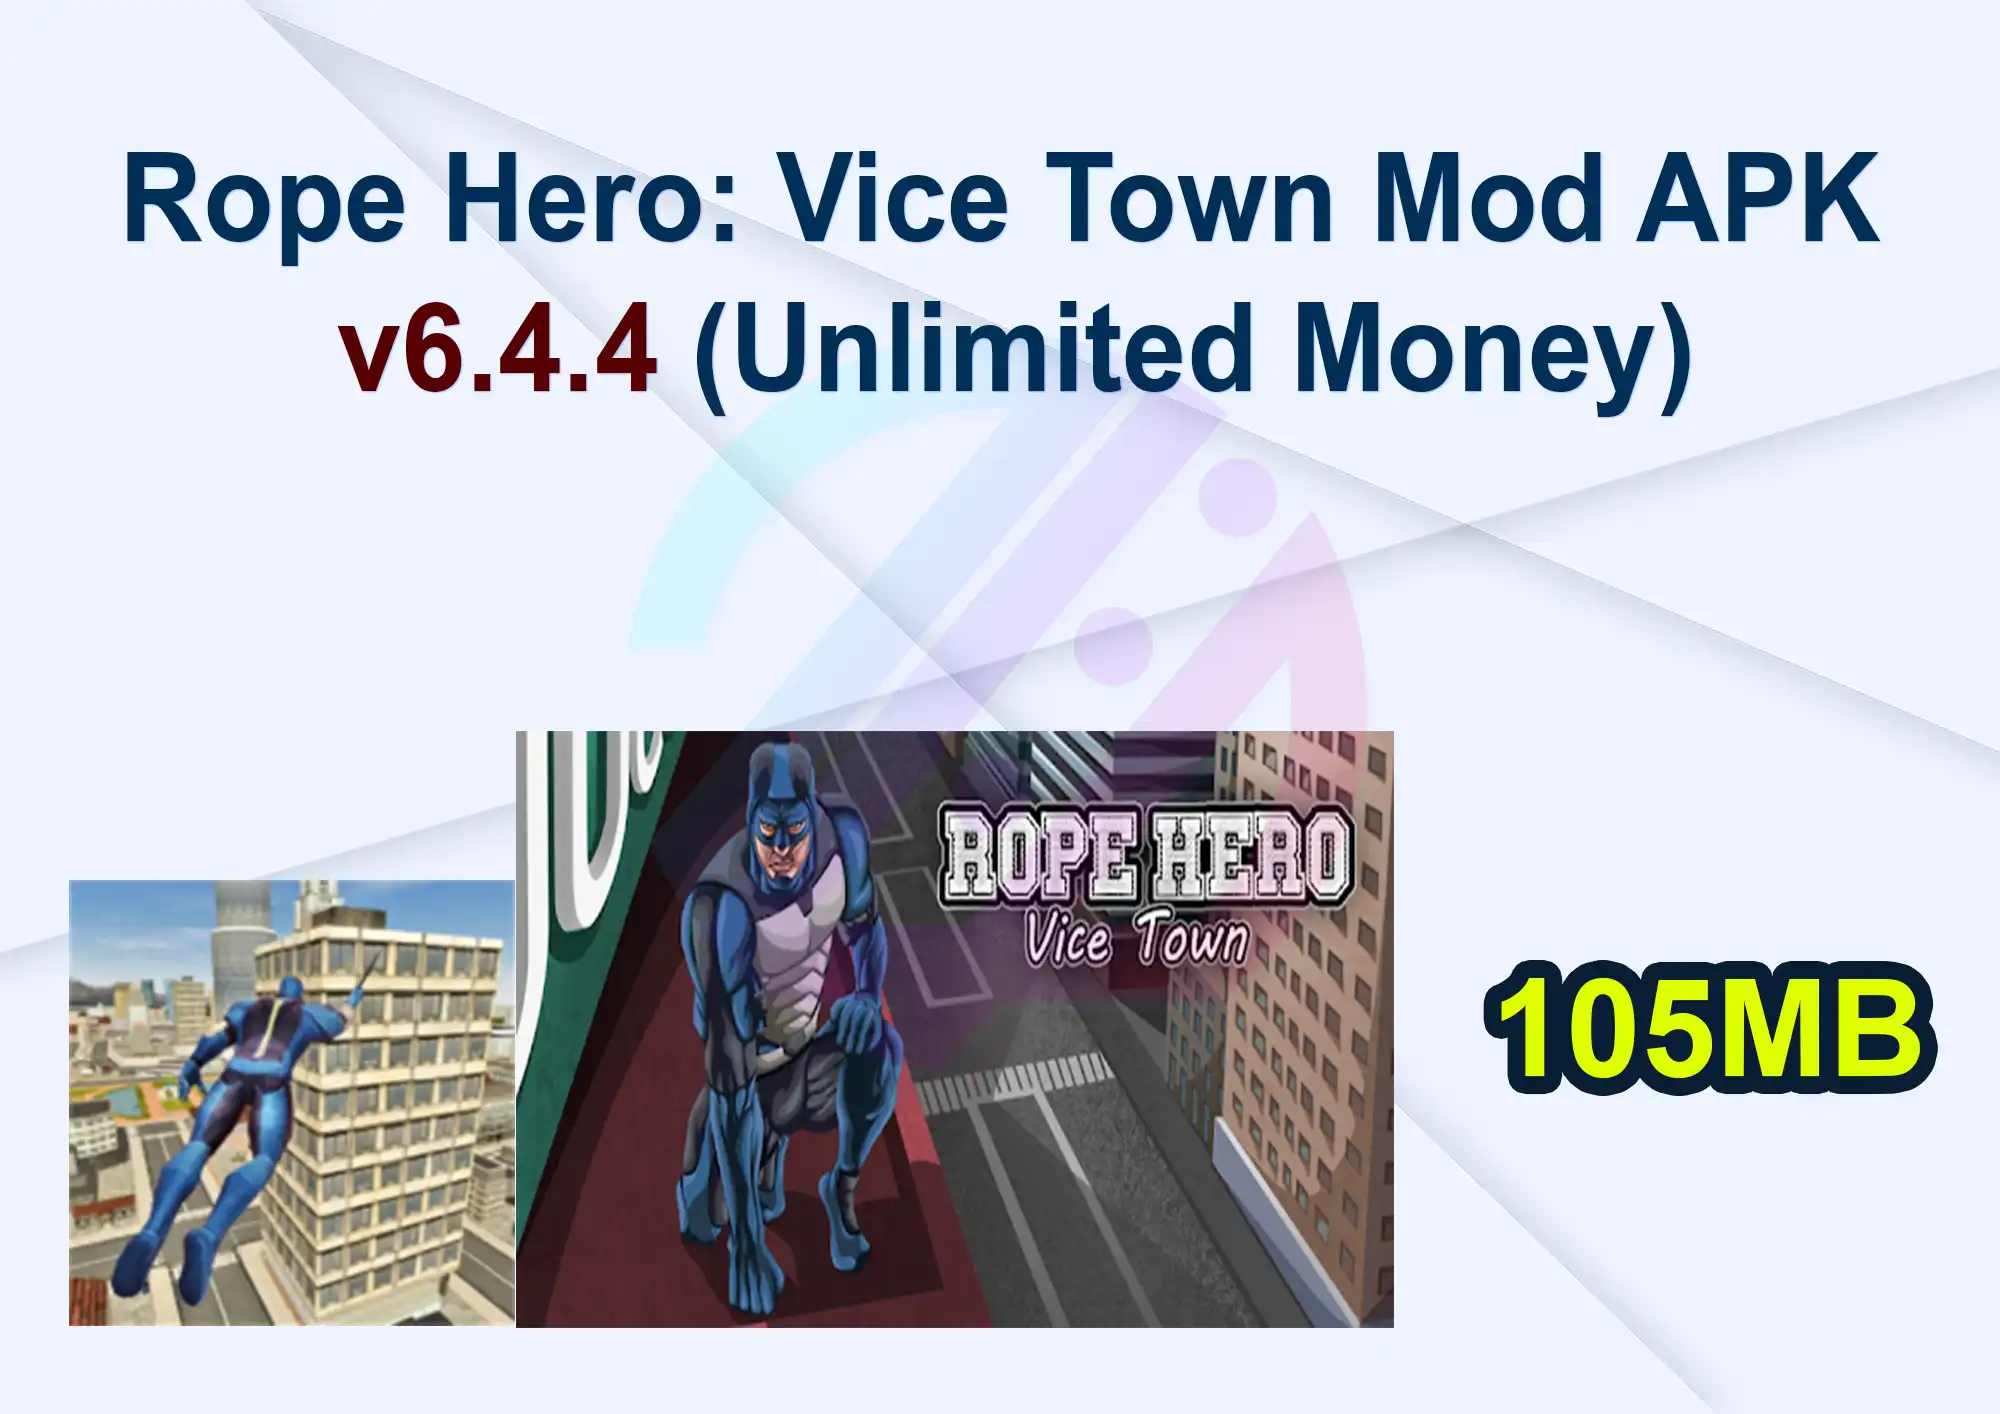 Rope Hero: Vice Town Mod APK v6.4.4 (Unlimited Money)